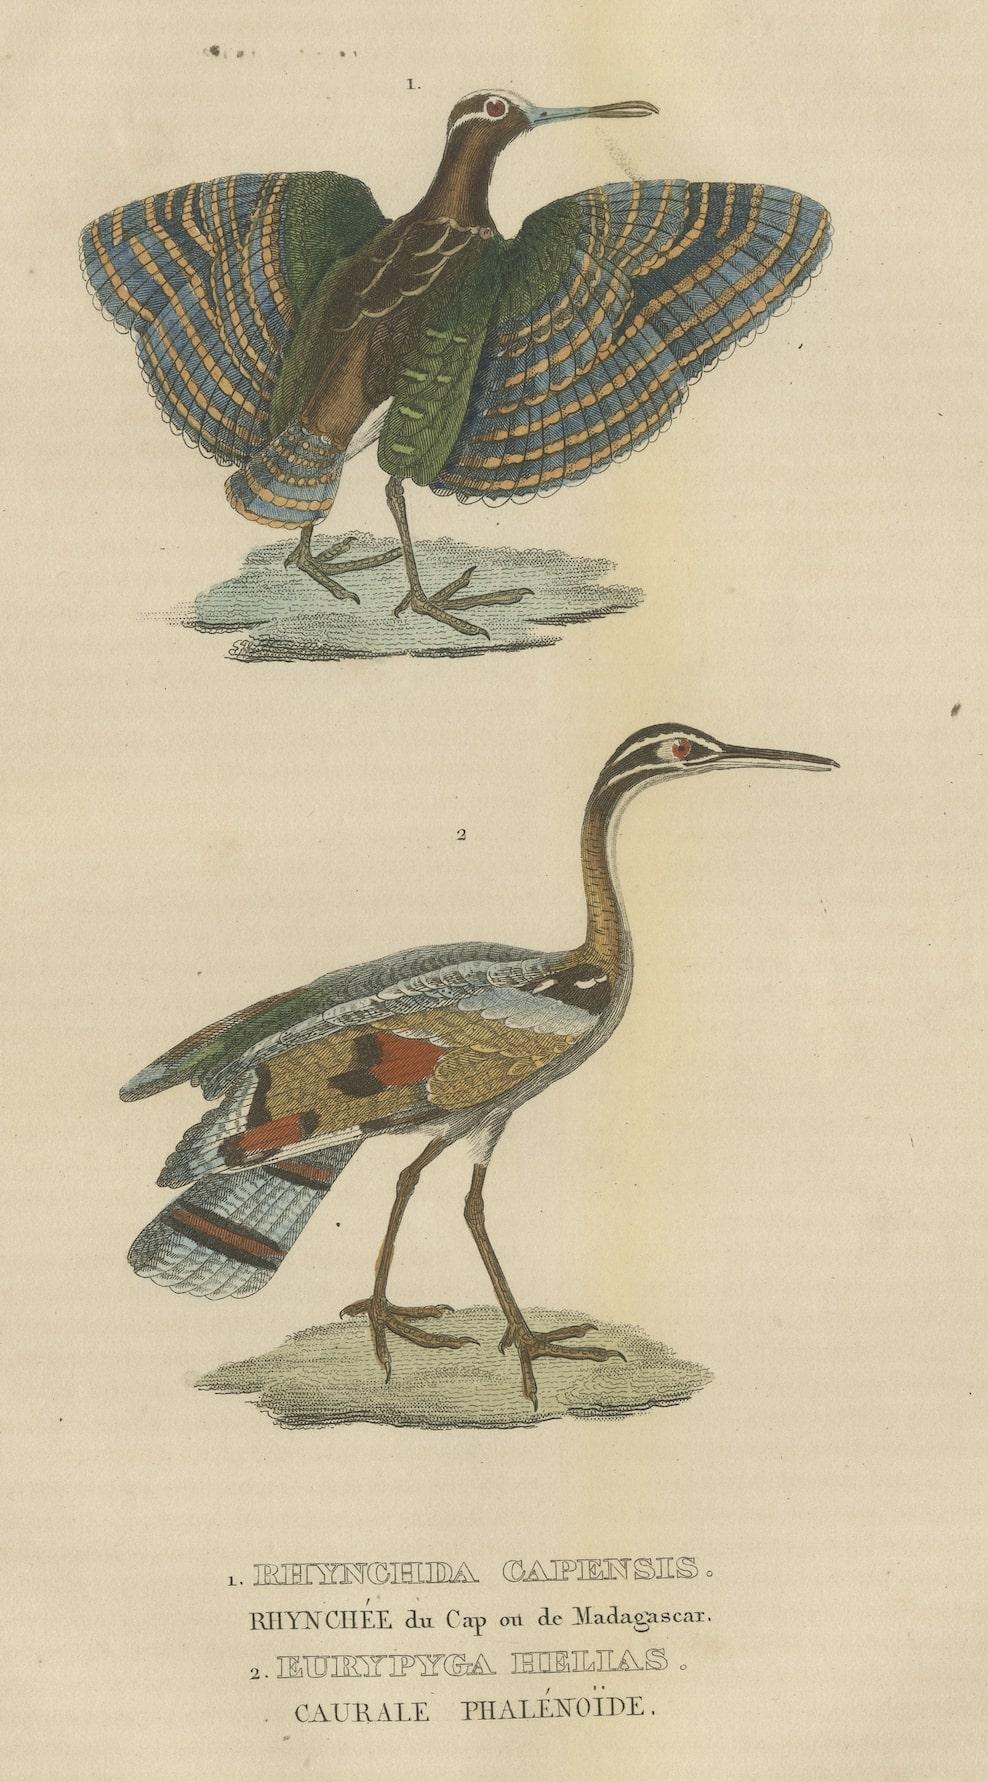 Paper Original Hand-Colored Bird Print of a Painted Snipe and Sunbittern Bird For Sale